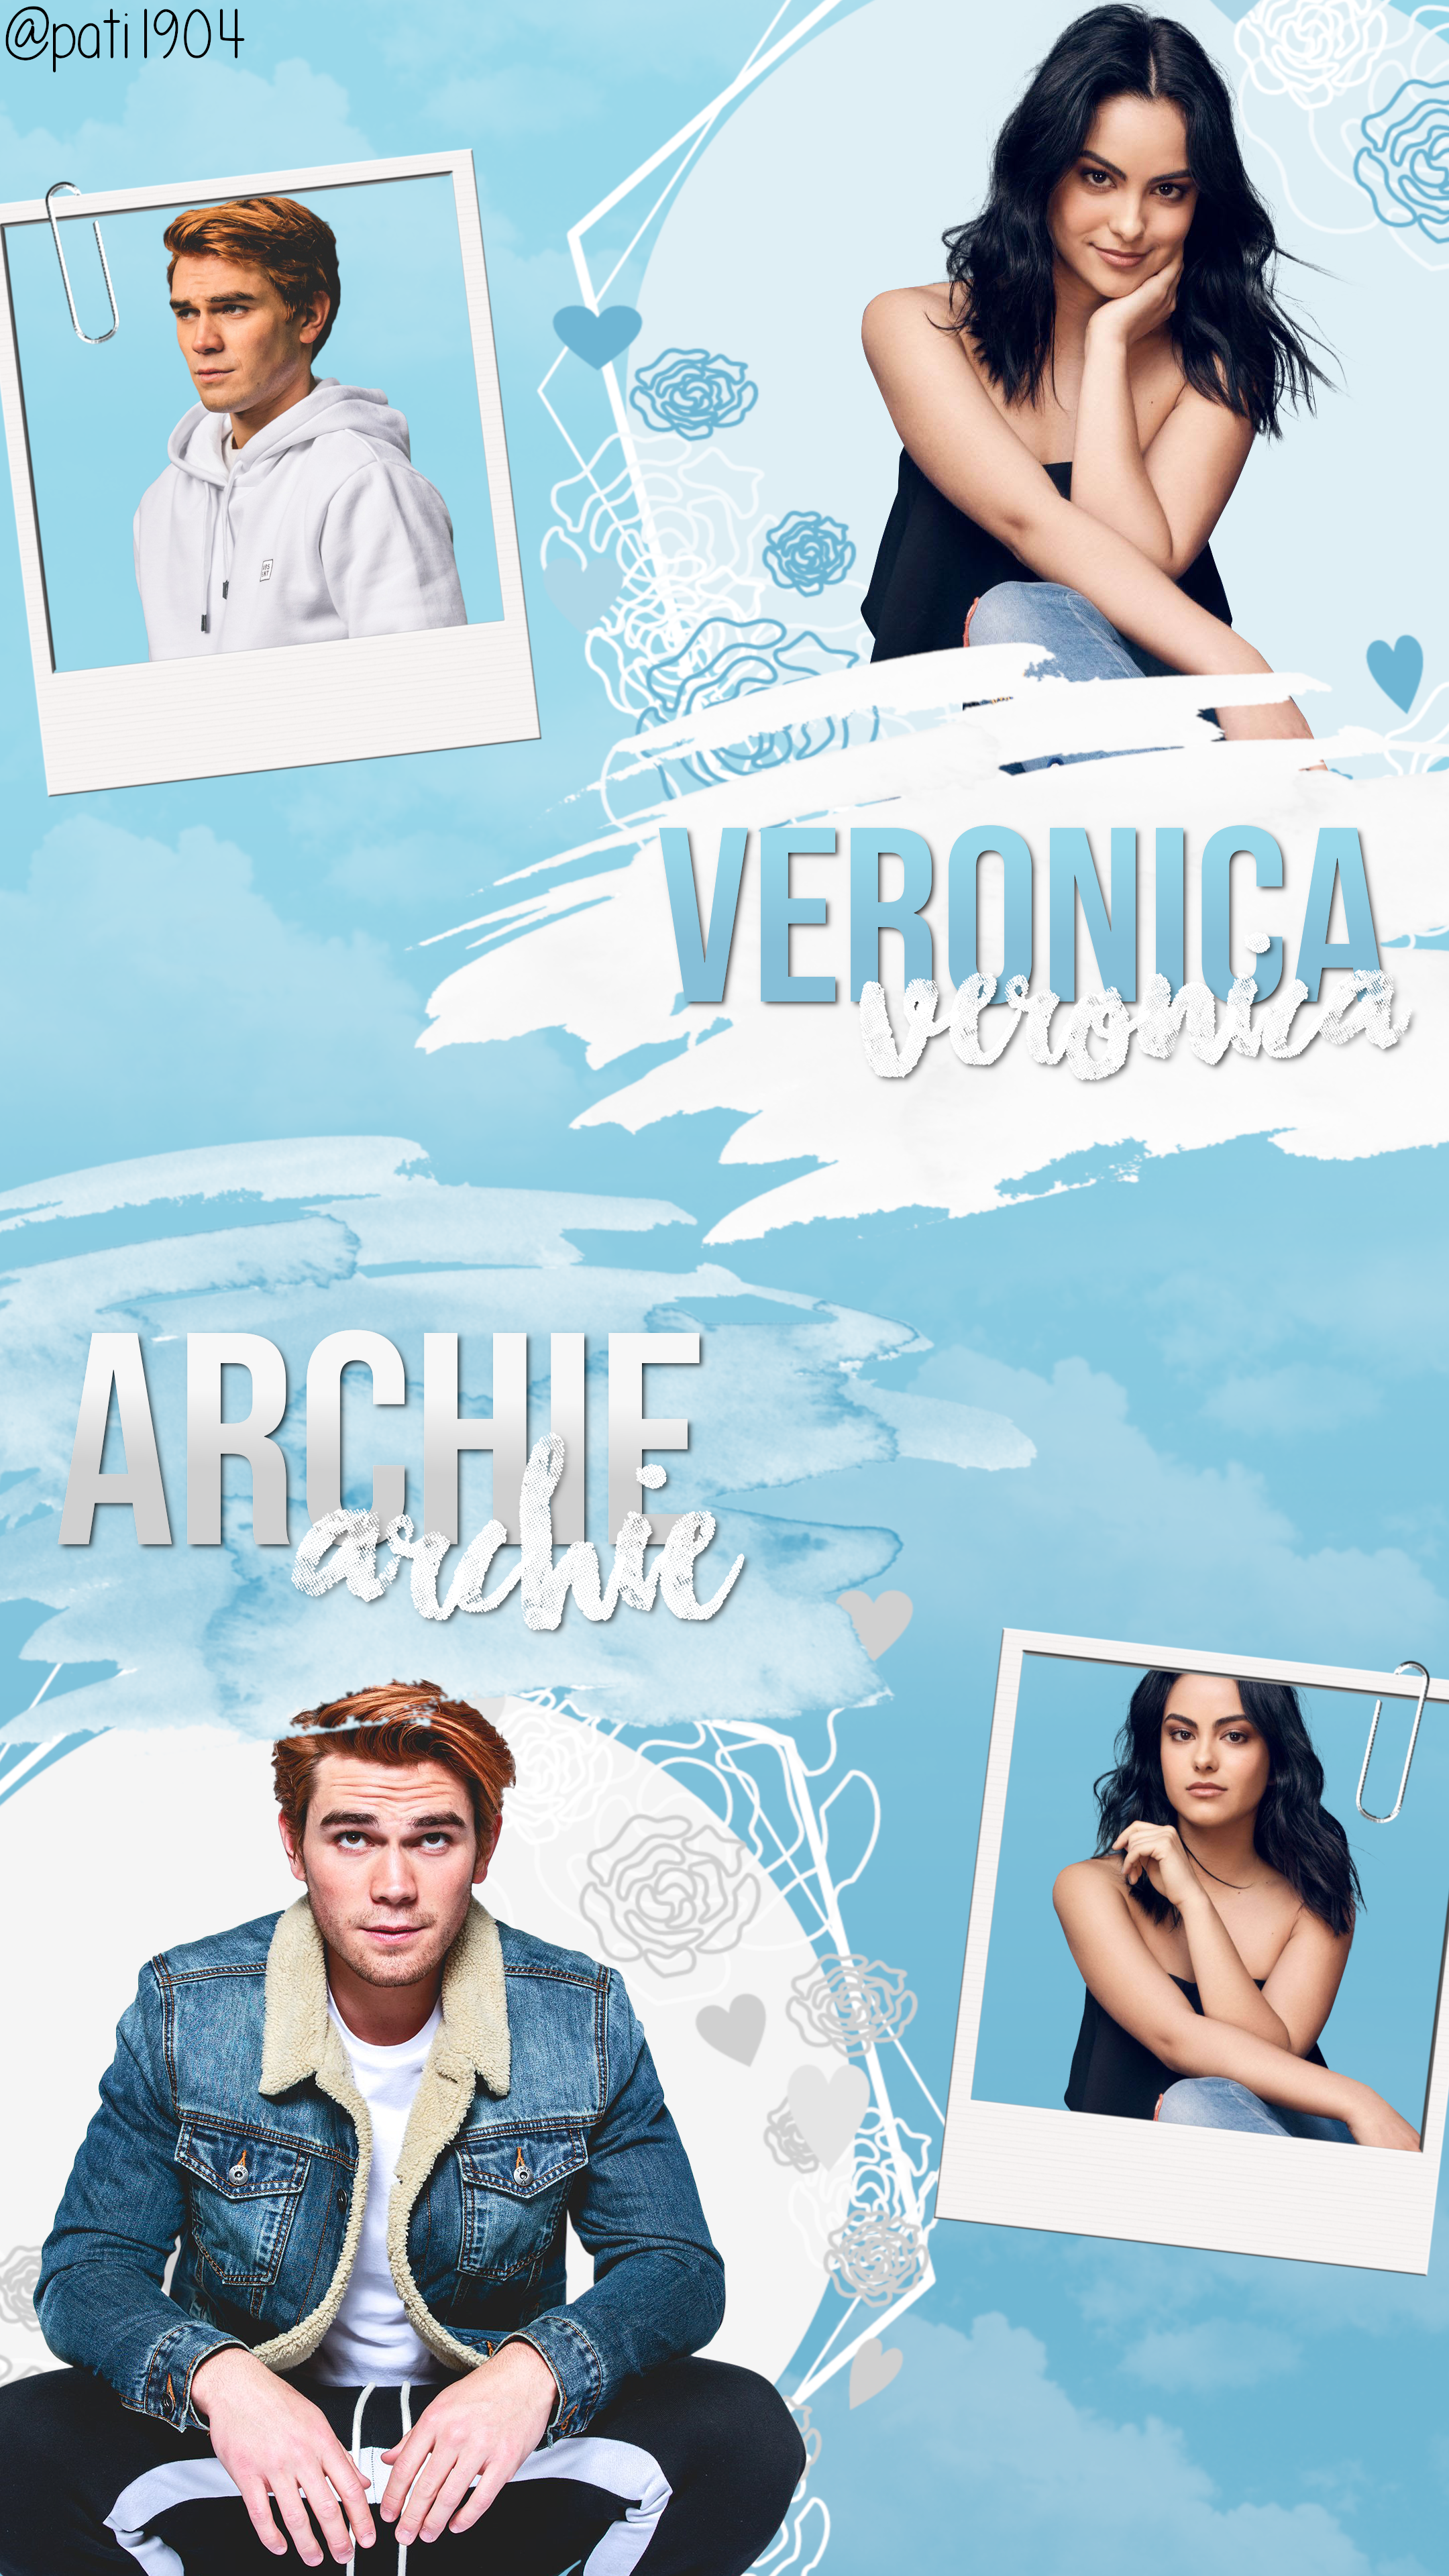 Wallpaper Veronica and Archie #wallpaper #veronica #archie #riverdale #varchie. Riverdale archie, Riverdale veronica, Riverdale aesthetic